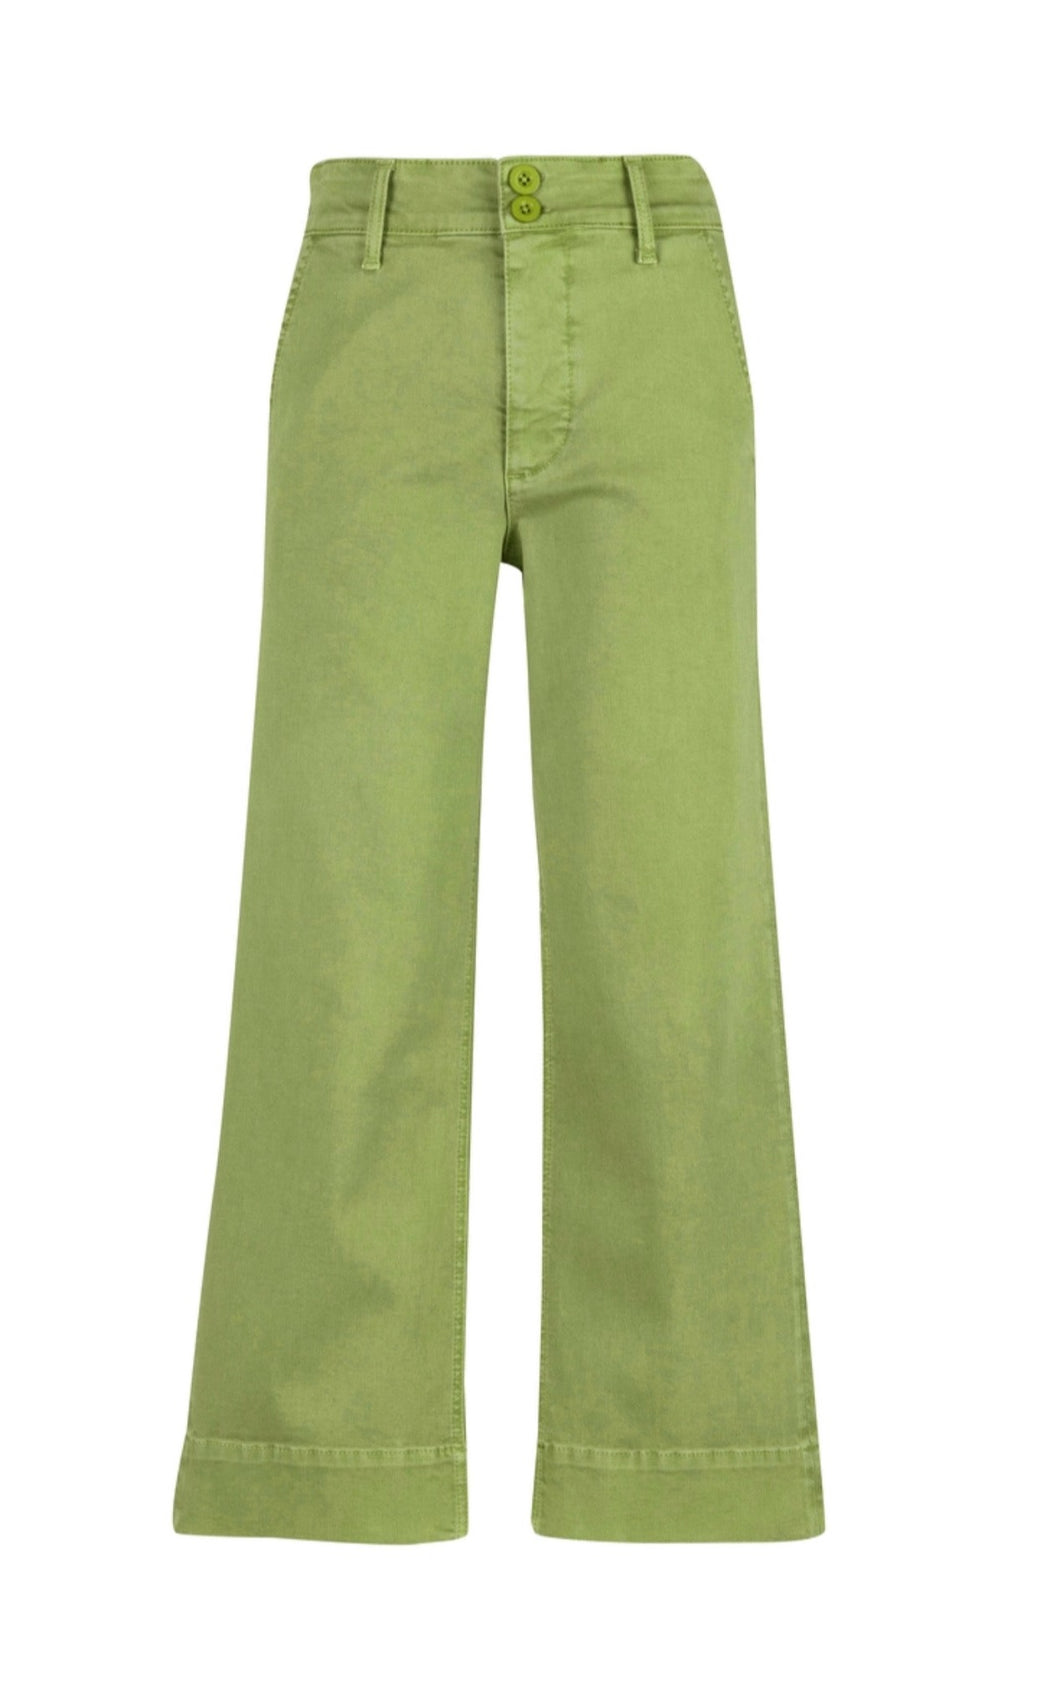 The Charlotte Wide Leg Crop Pant (Pear) by Kut From The Kloth